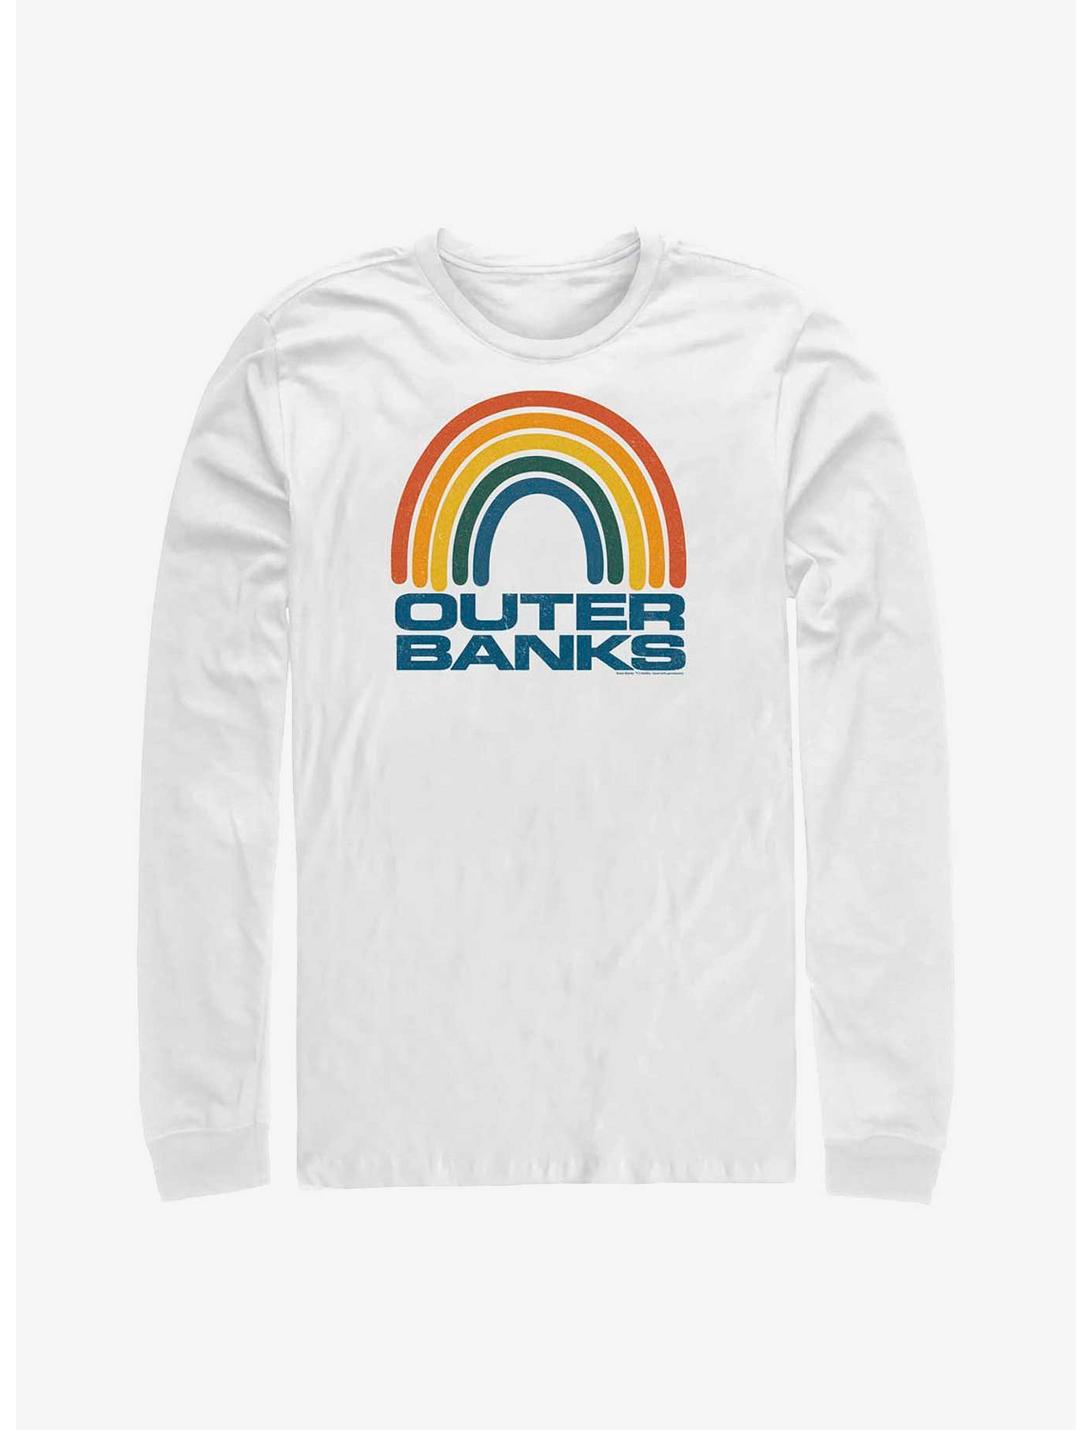 Outer Banks OBX Rainbow Long-Sleeve T-Shirt, WHITE, hi-res